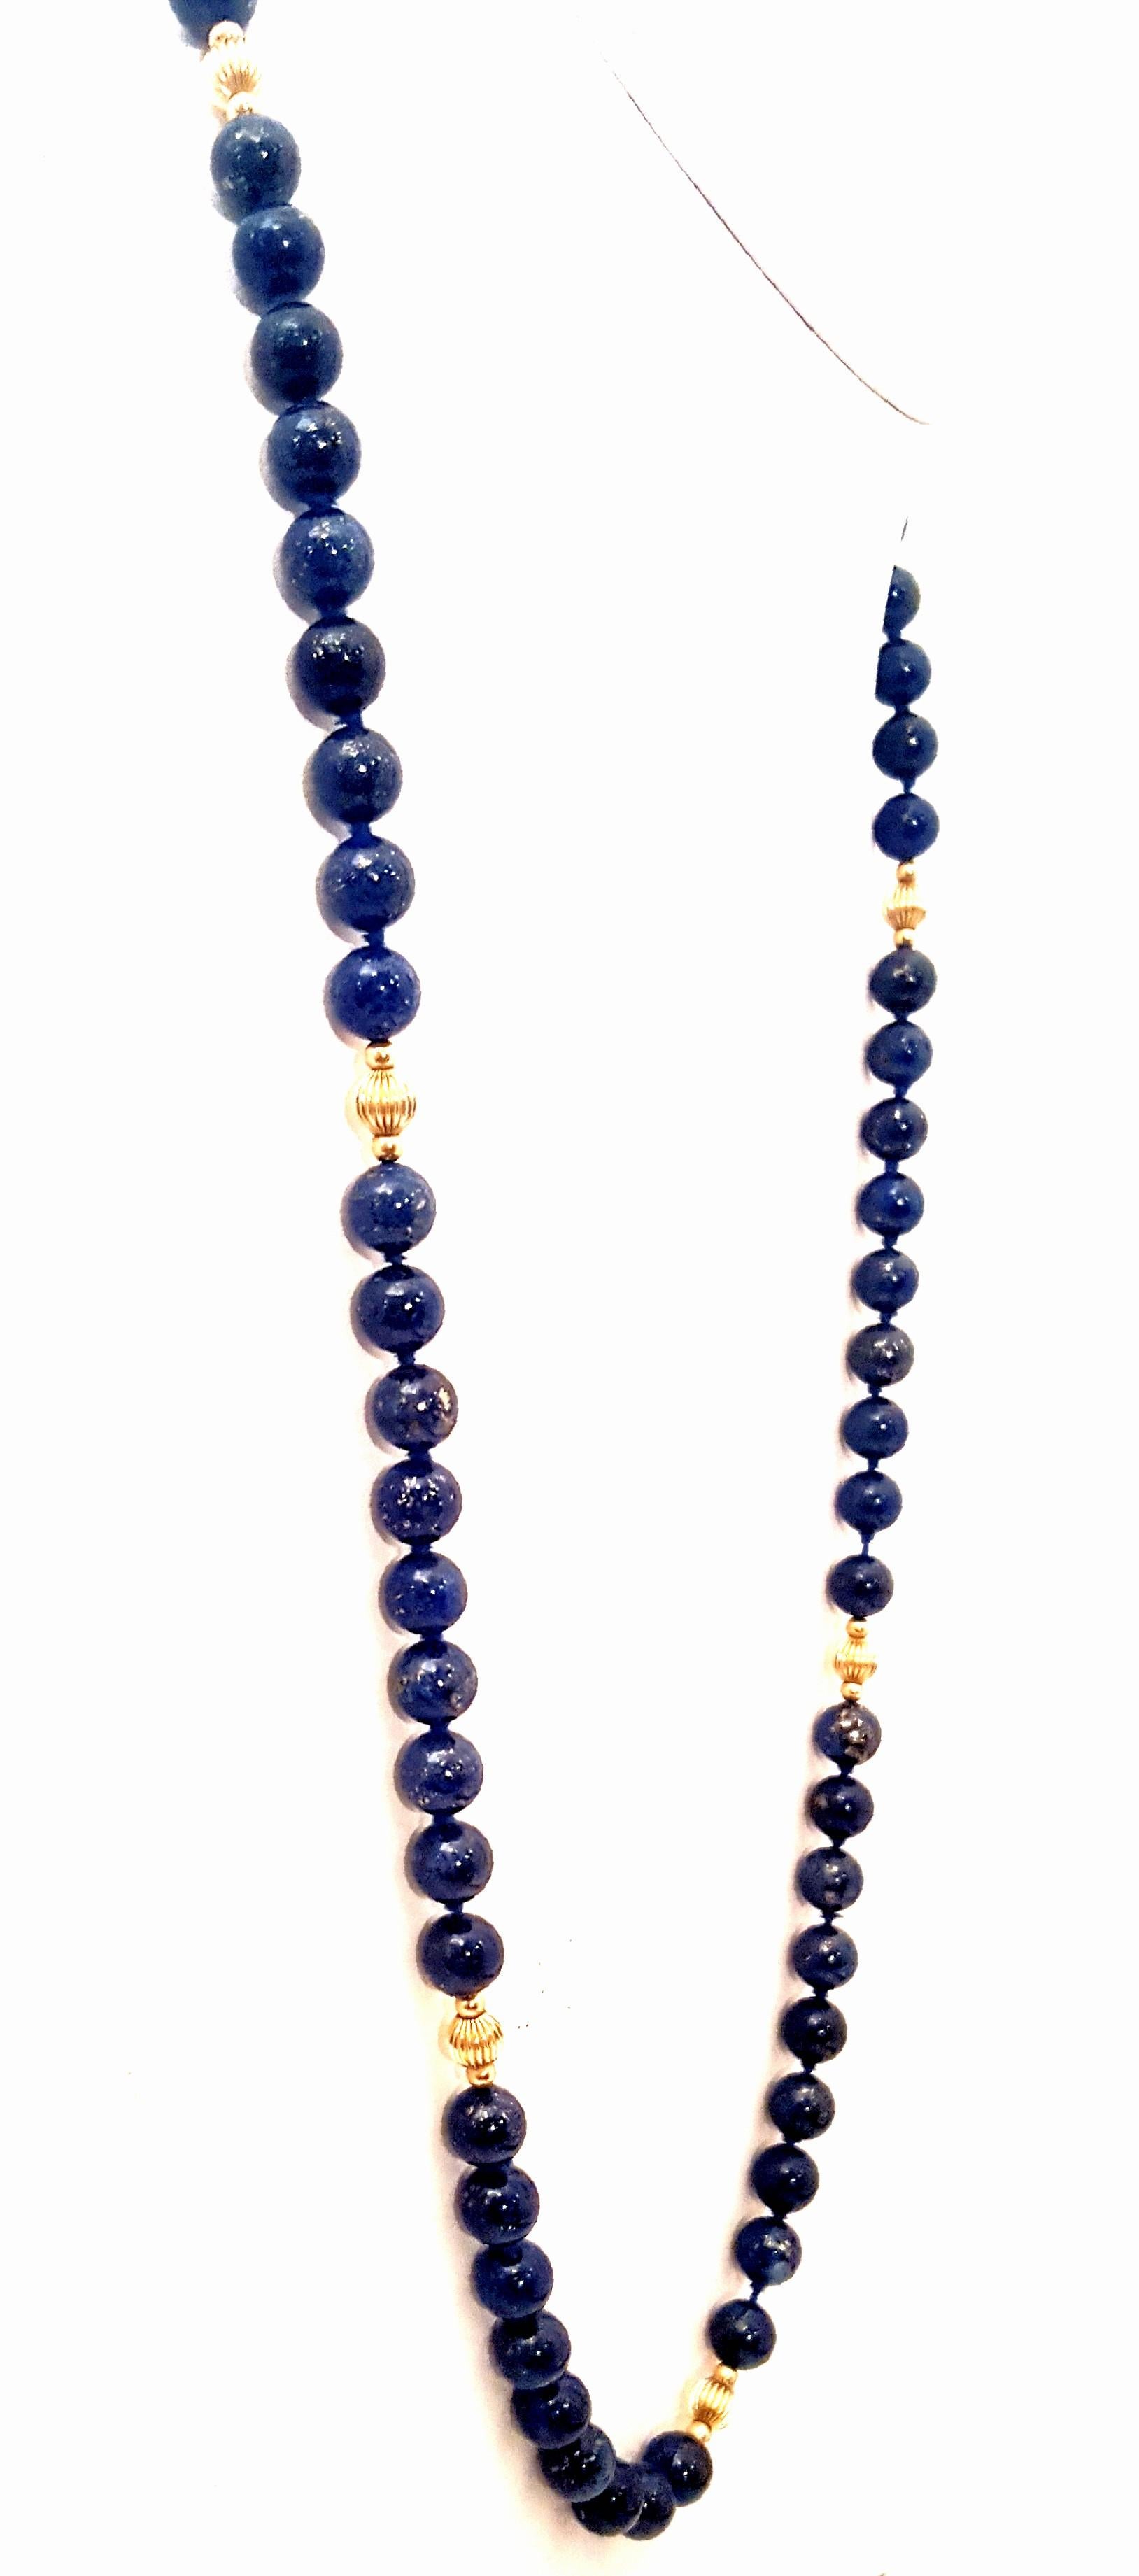 Veins of glinting yellow pyrite randomly light up these 8.5mm lapis beads.  The intense blue color is quite stunning.  This 32